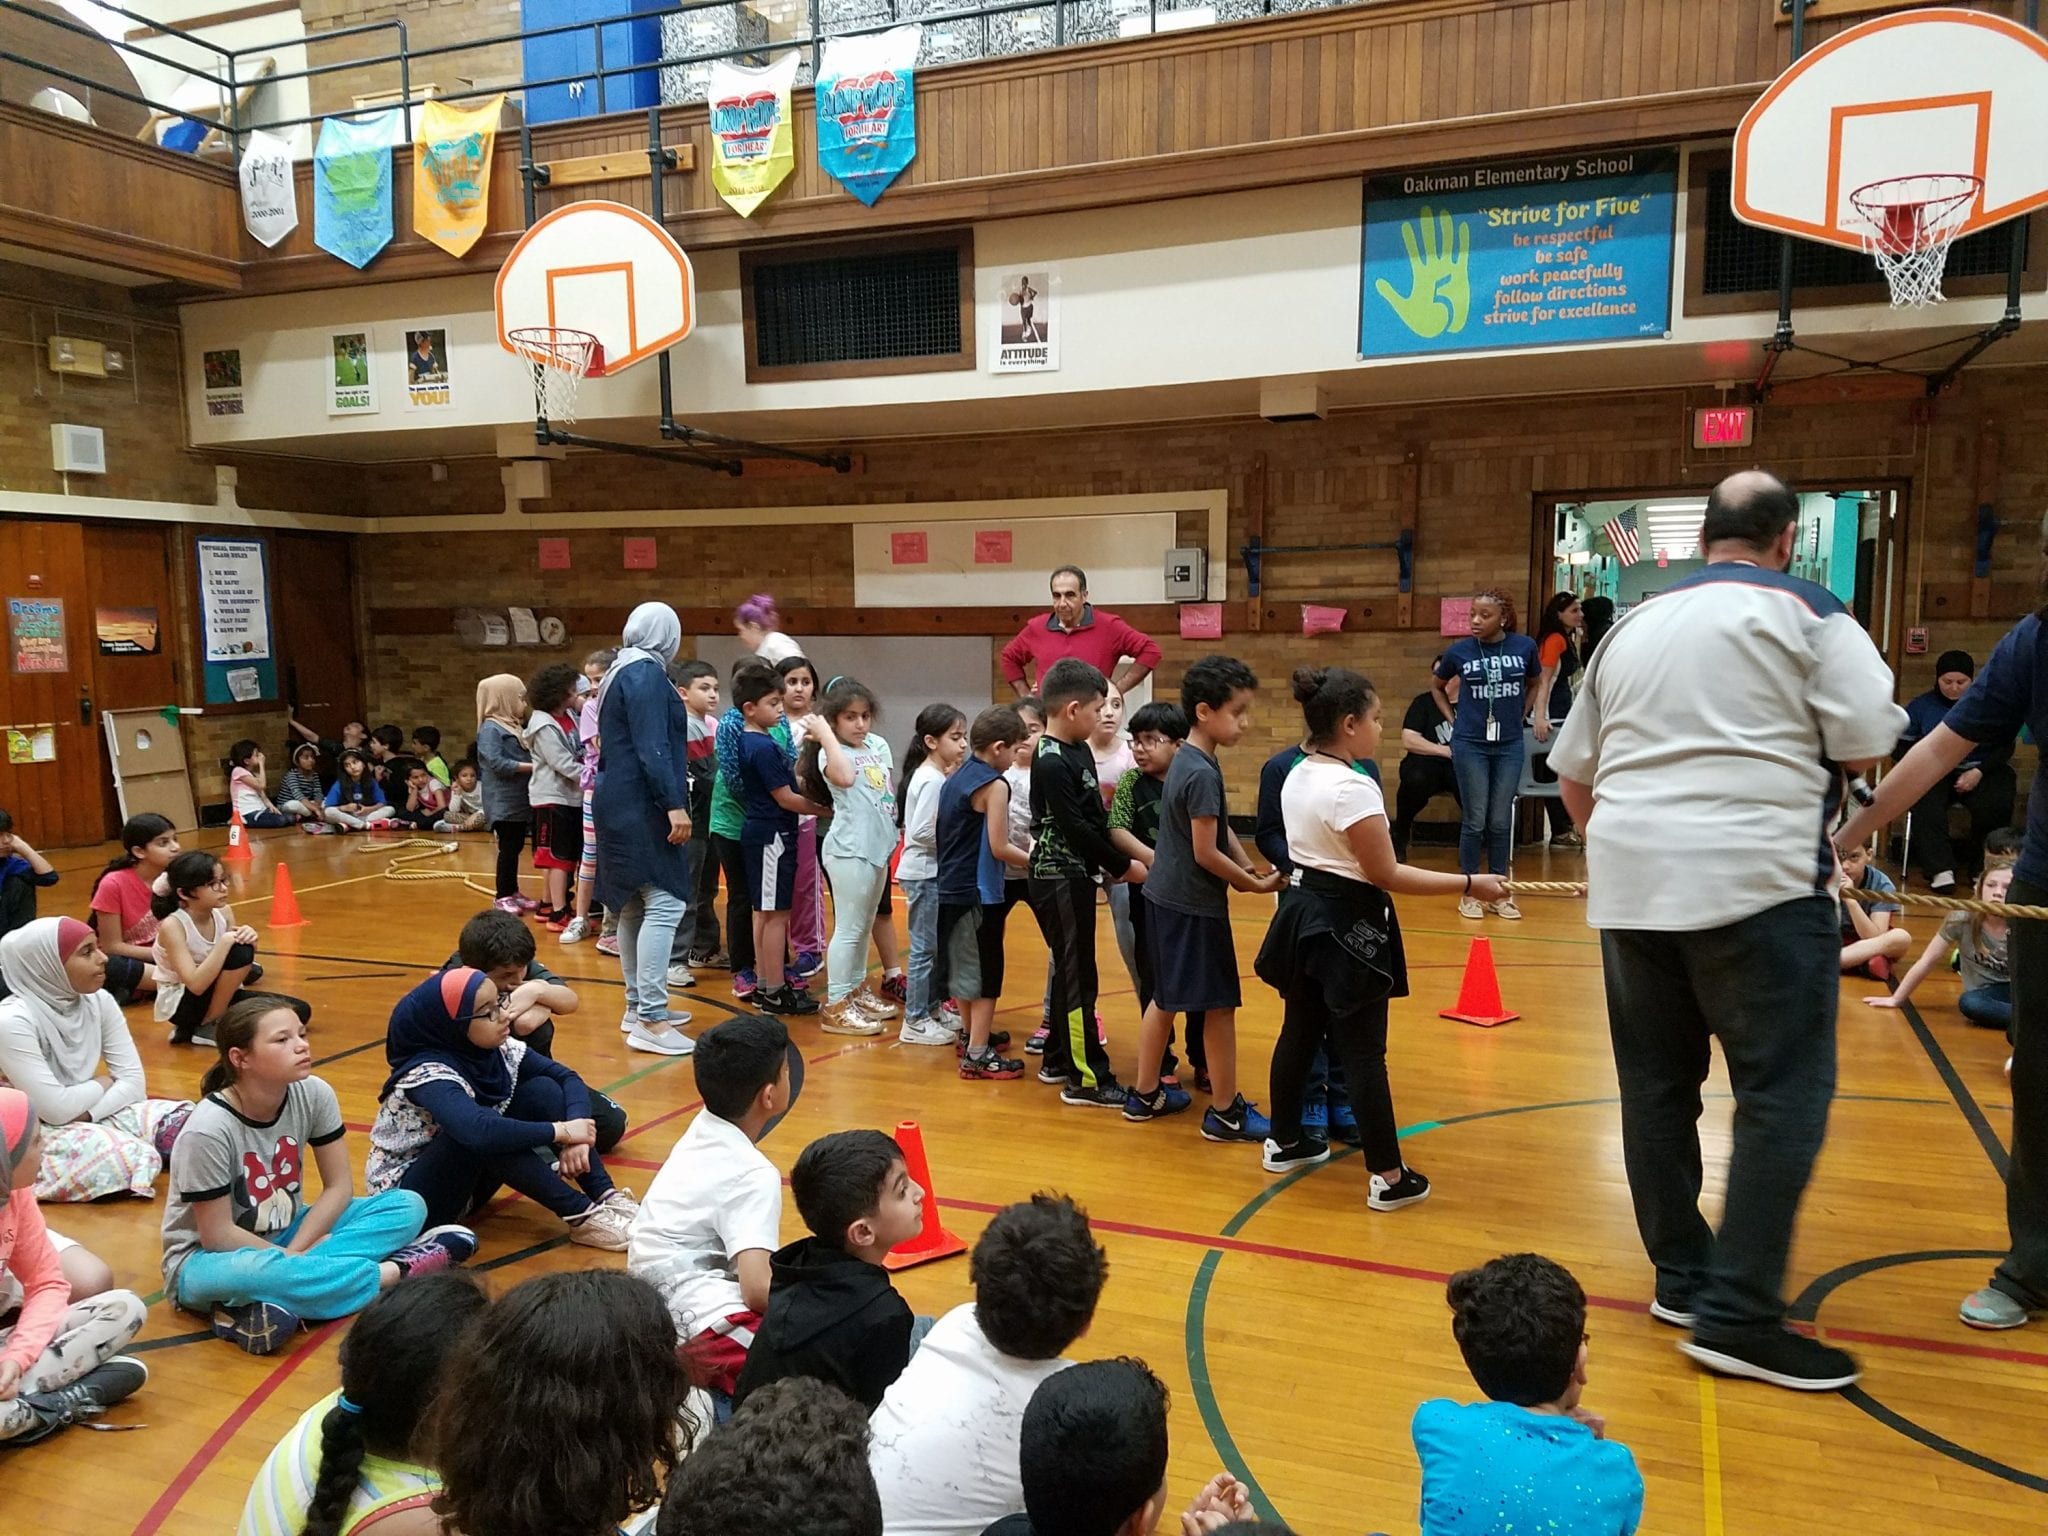 2nd graders getting ready for Tug of War